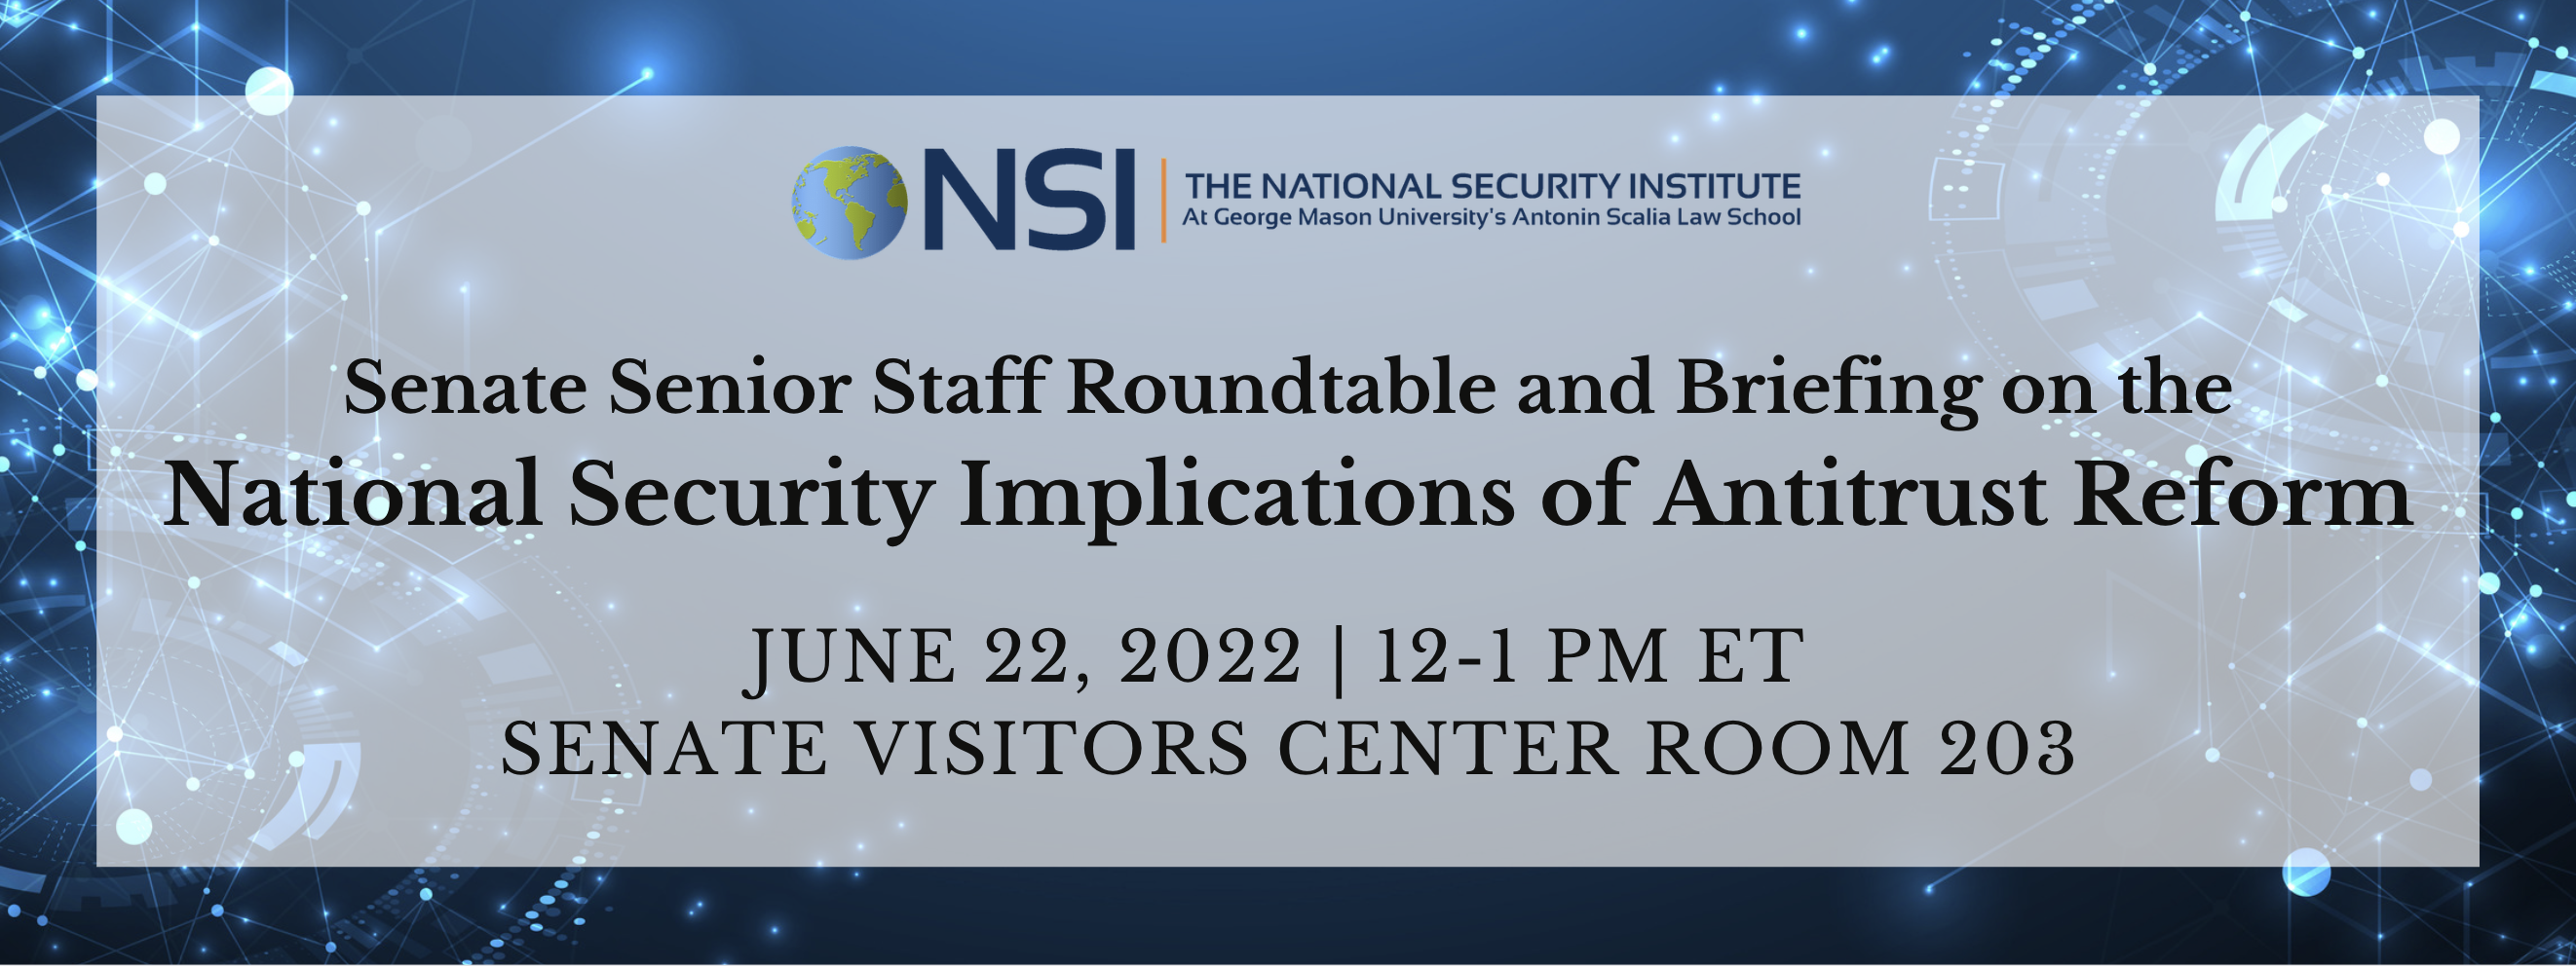 Senate Roundtable on the National Security Implications of Antitrust Reform